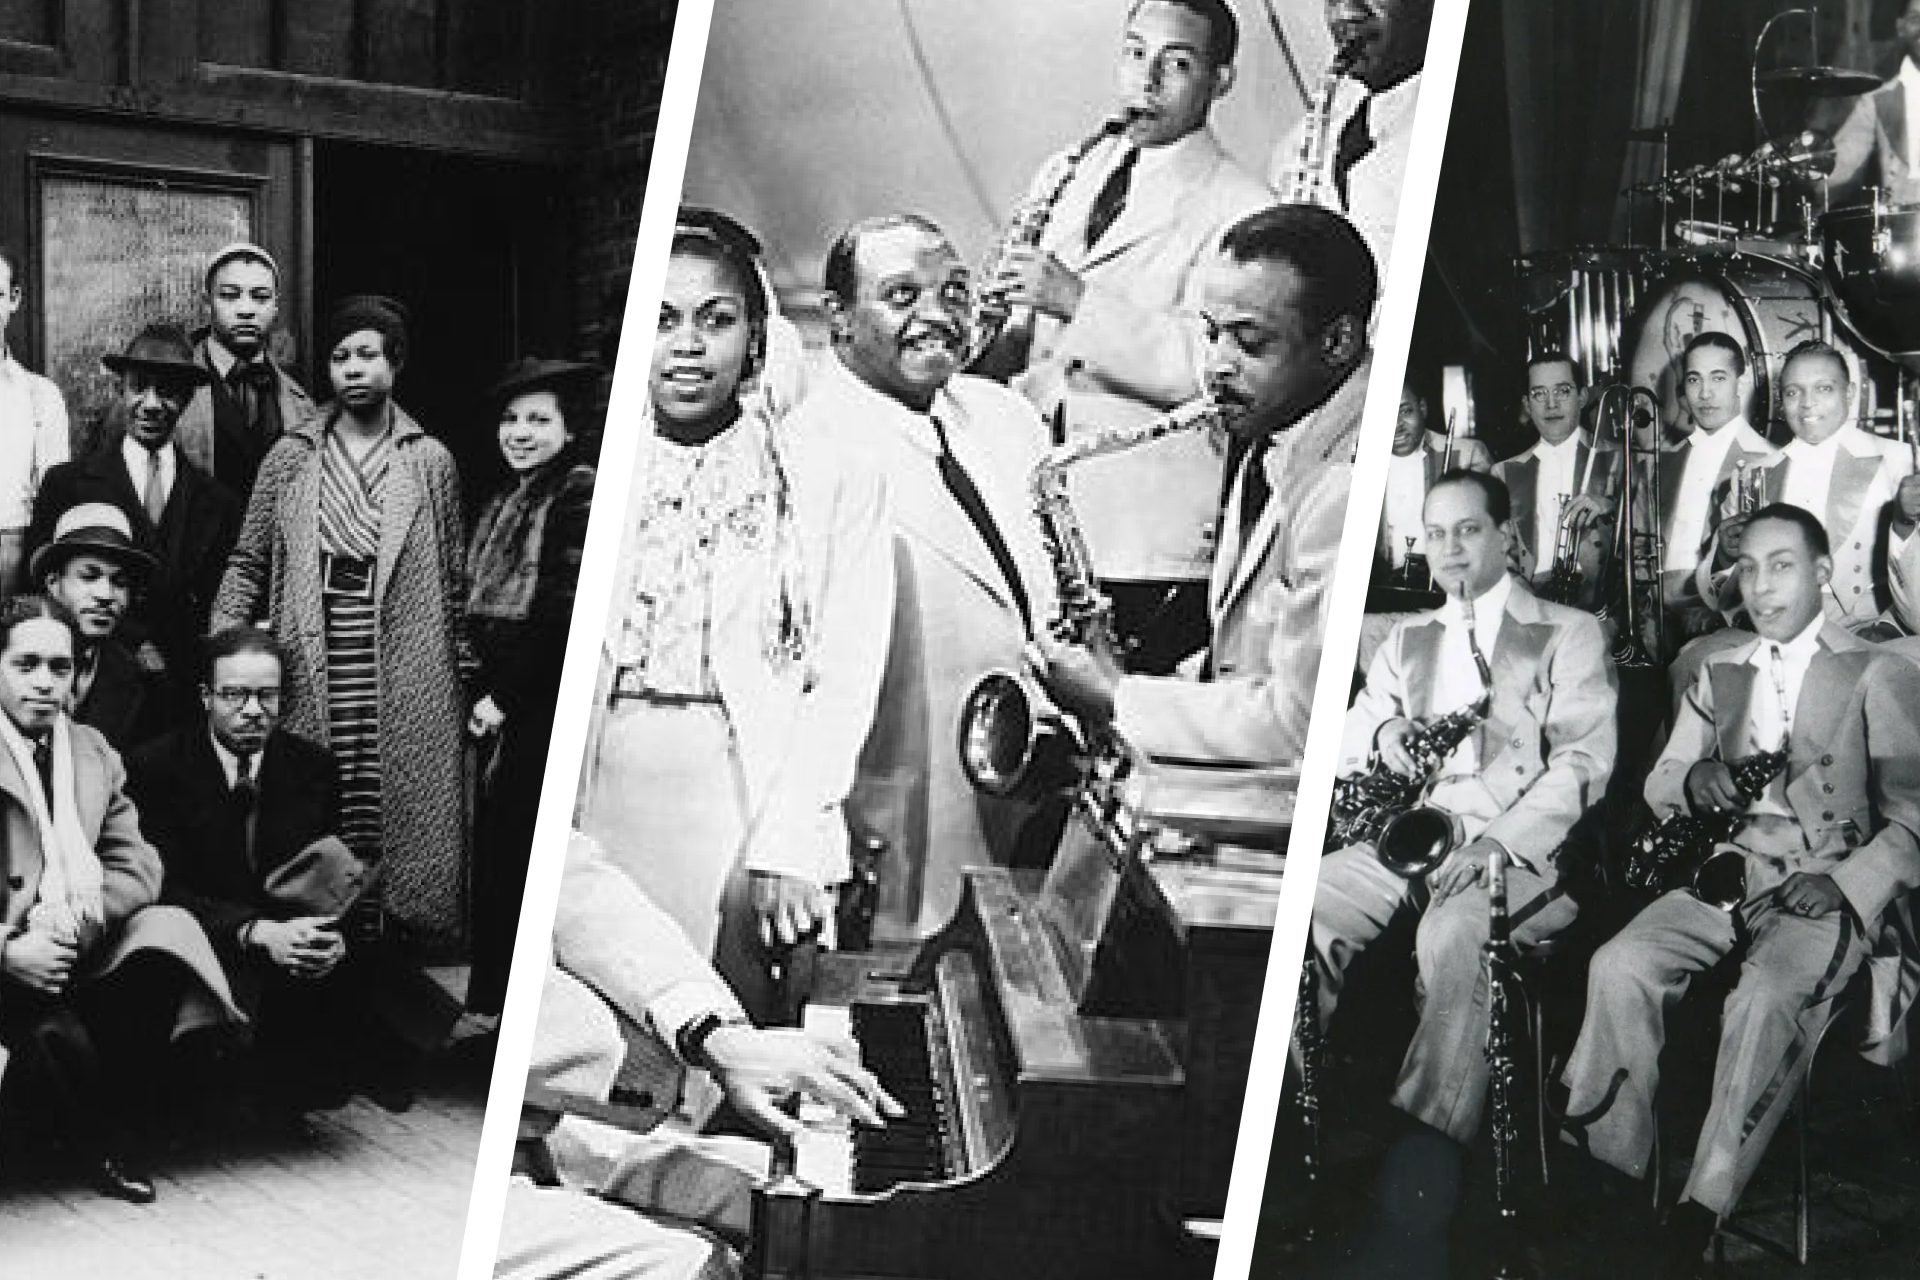 What Music Thrived In Harlem And What Were Its Characteristics